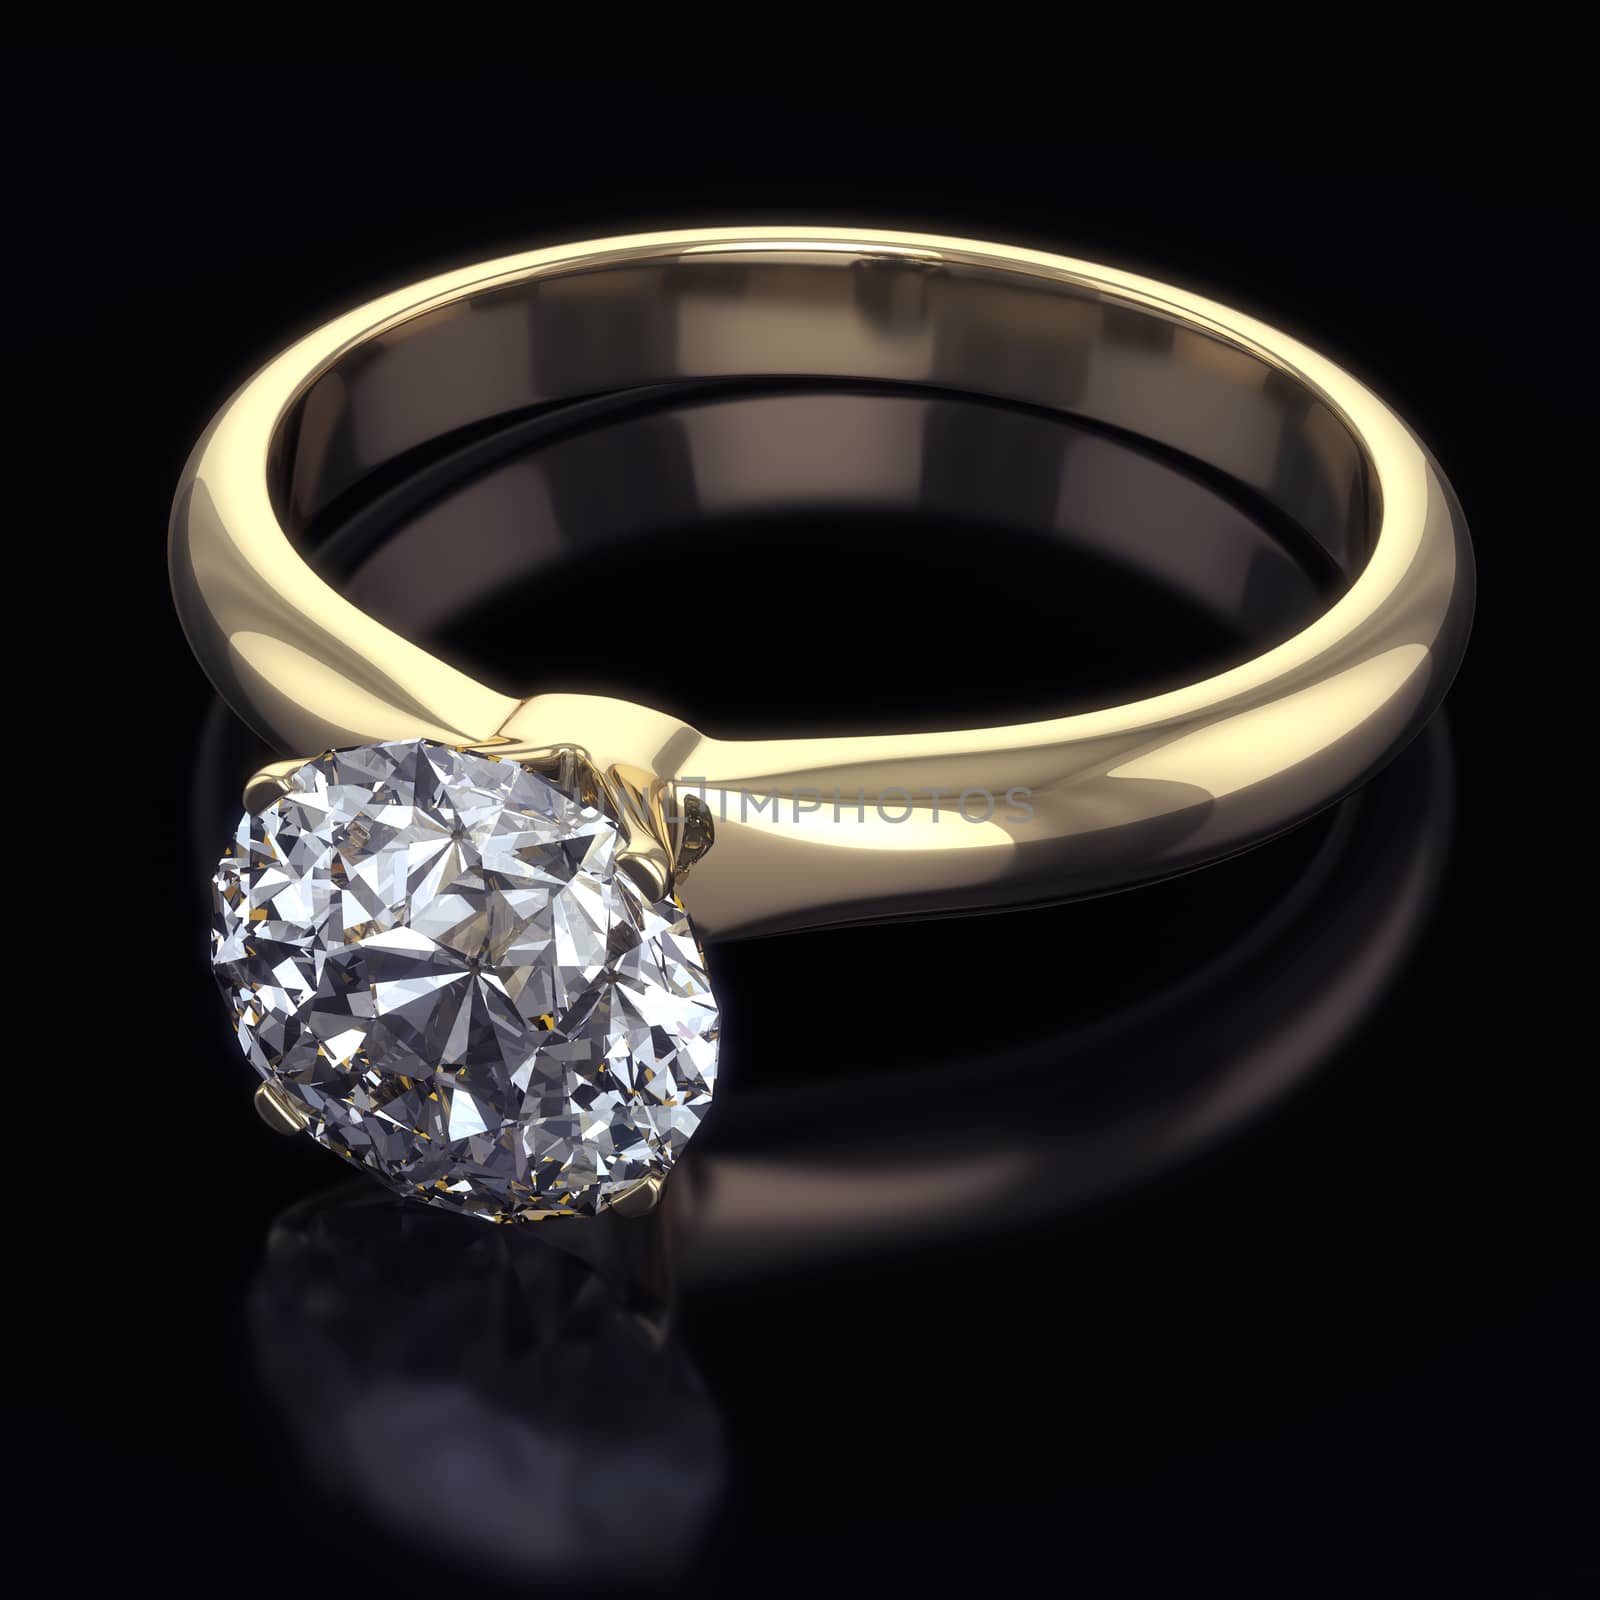 Luxury golden ring with big diamond - isolated with clipping path
